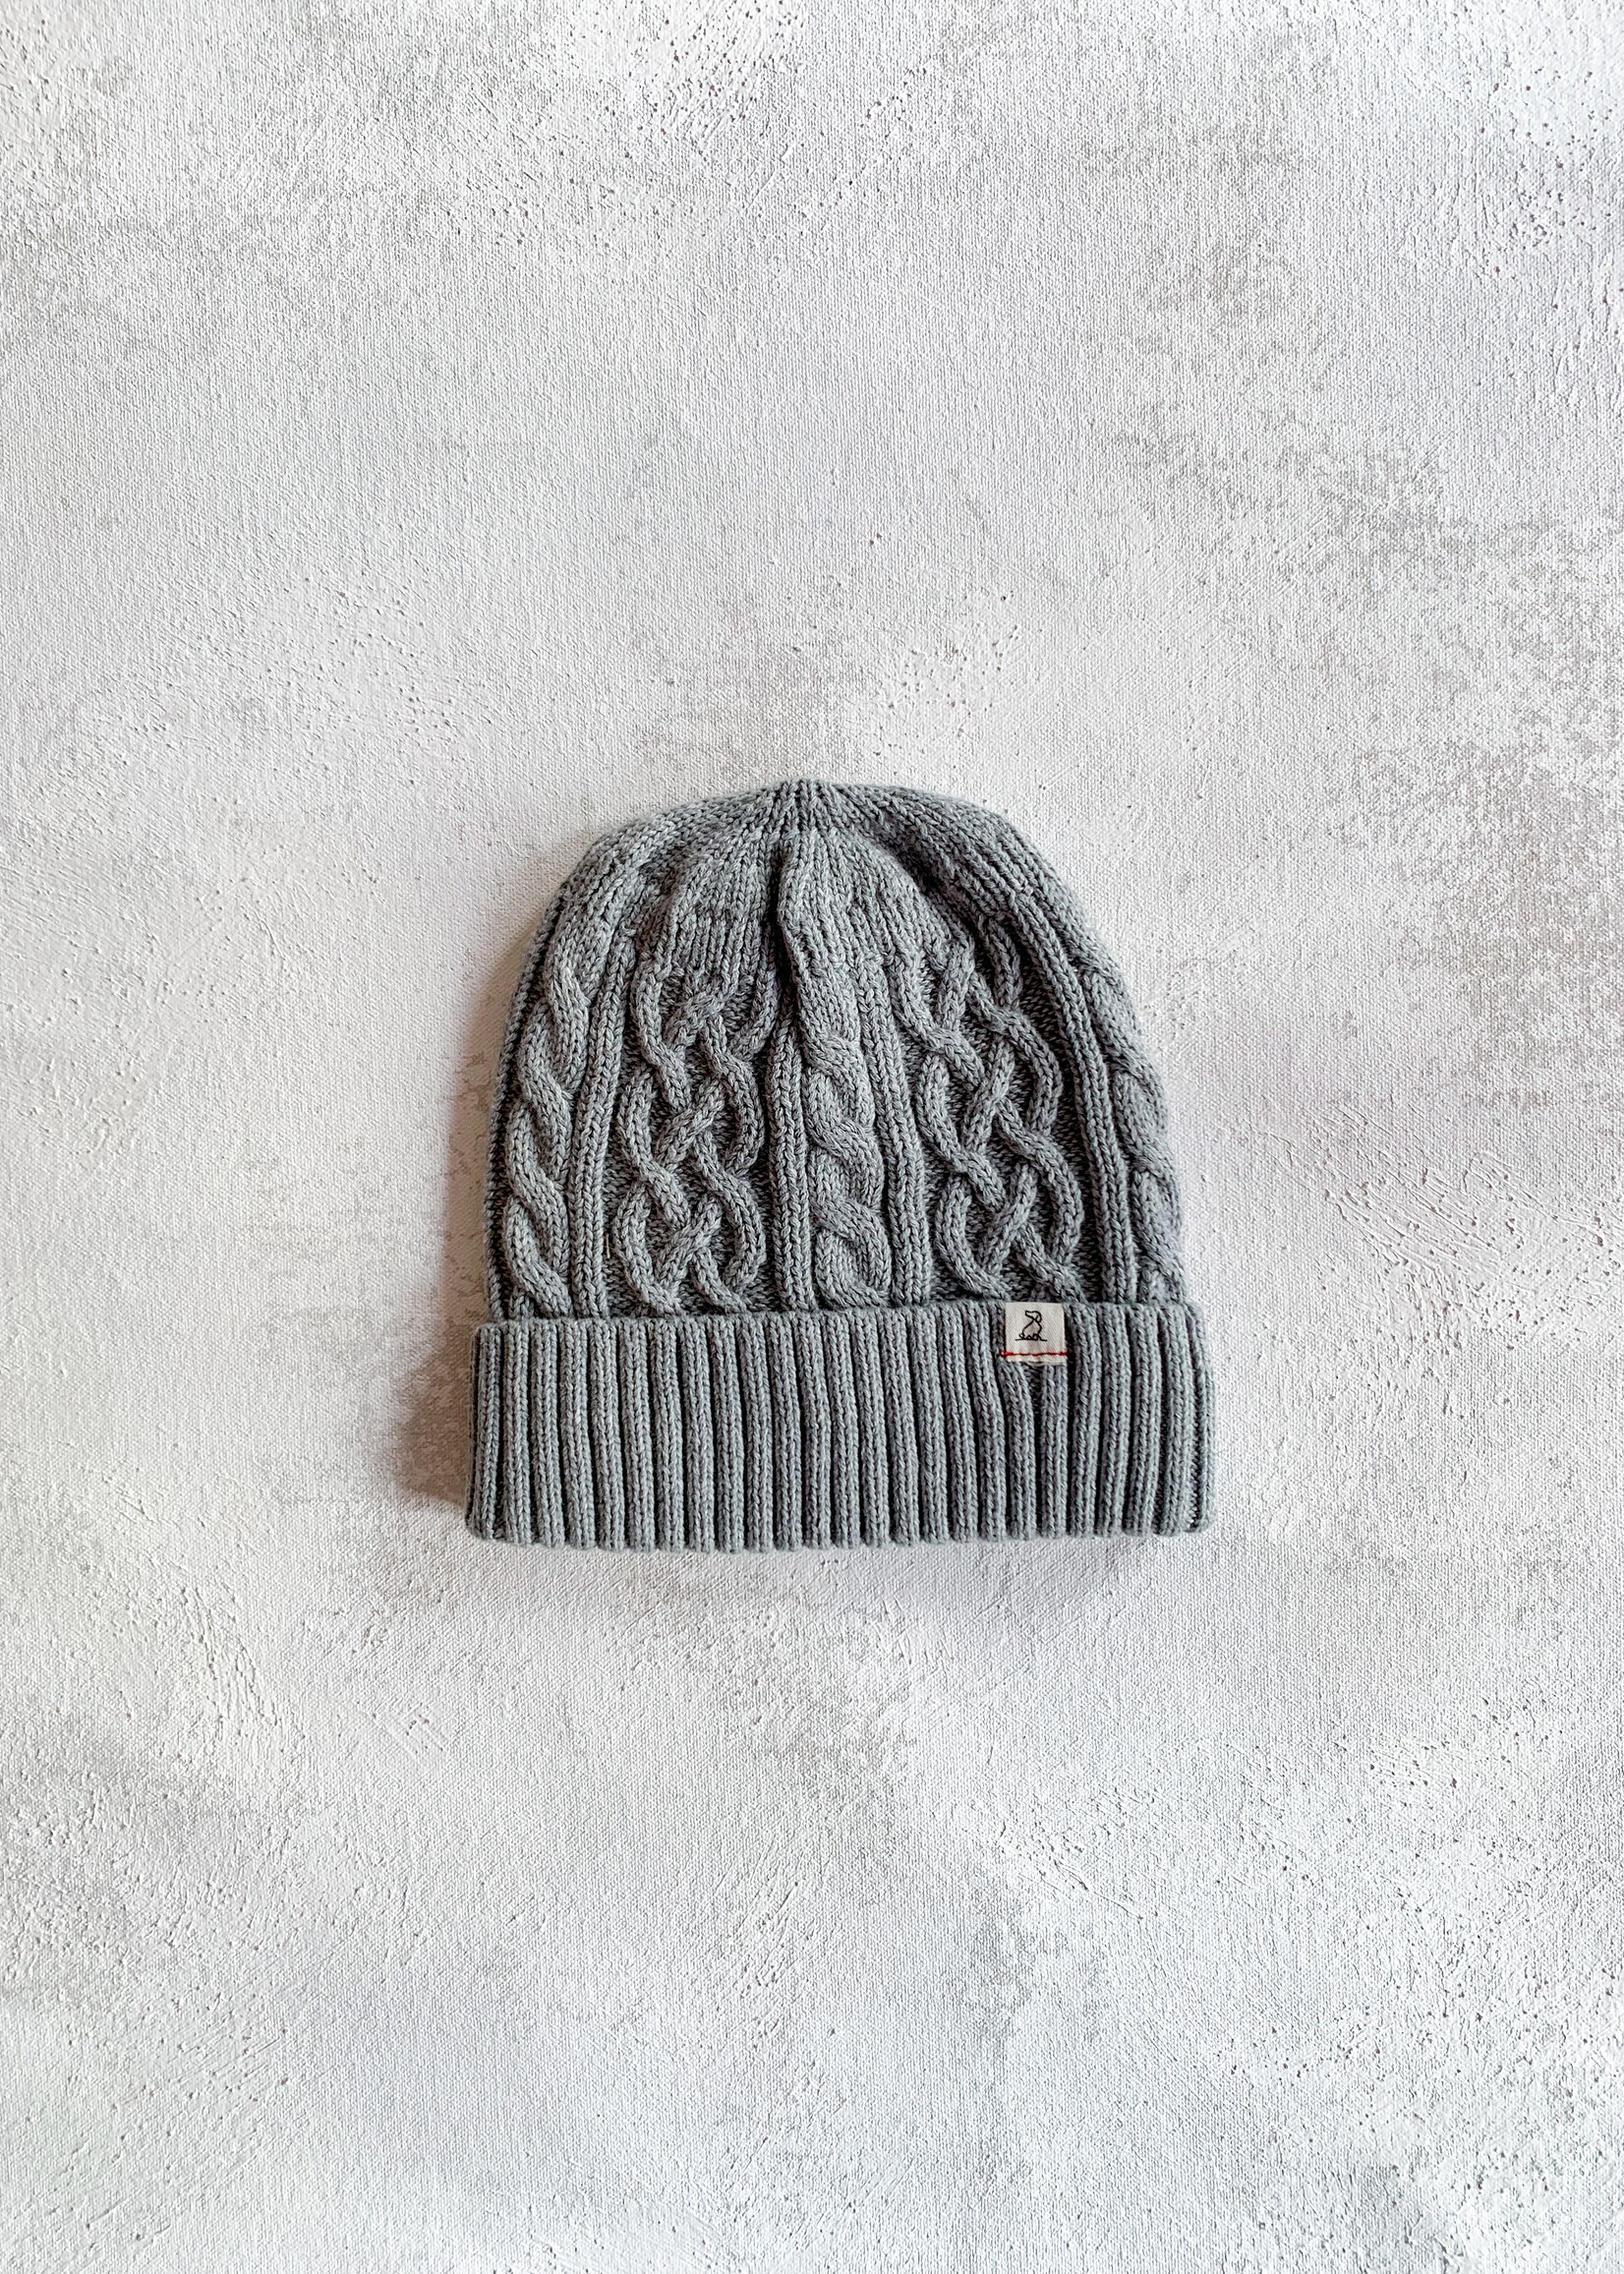 Elitaire Petite Arcadia Knit Hat in Light Grey